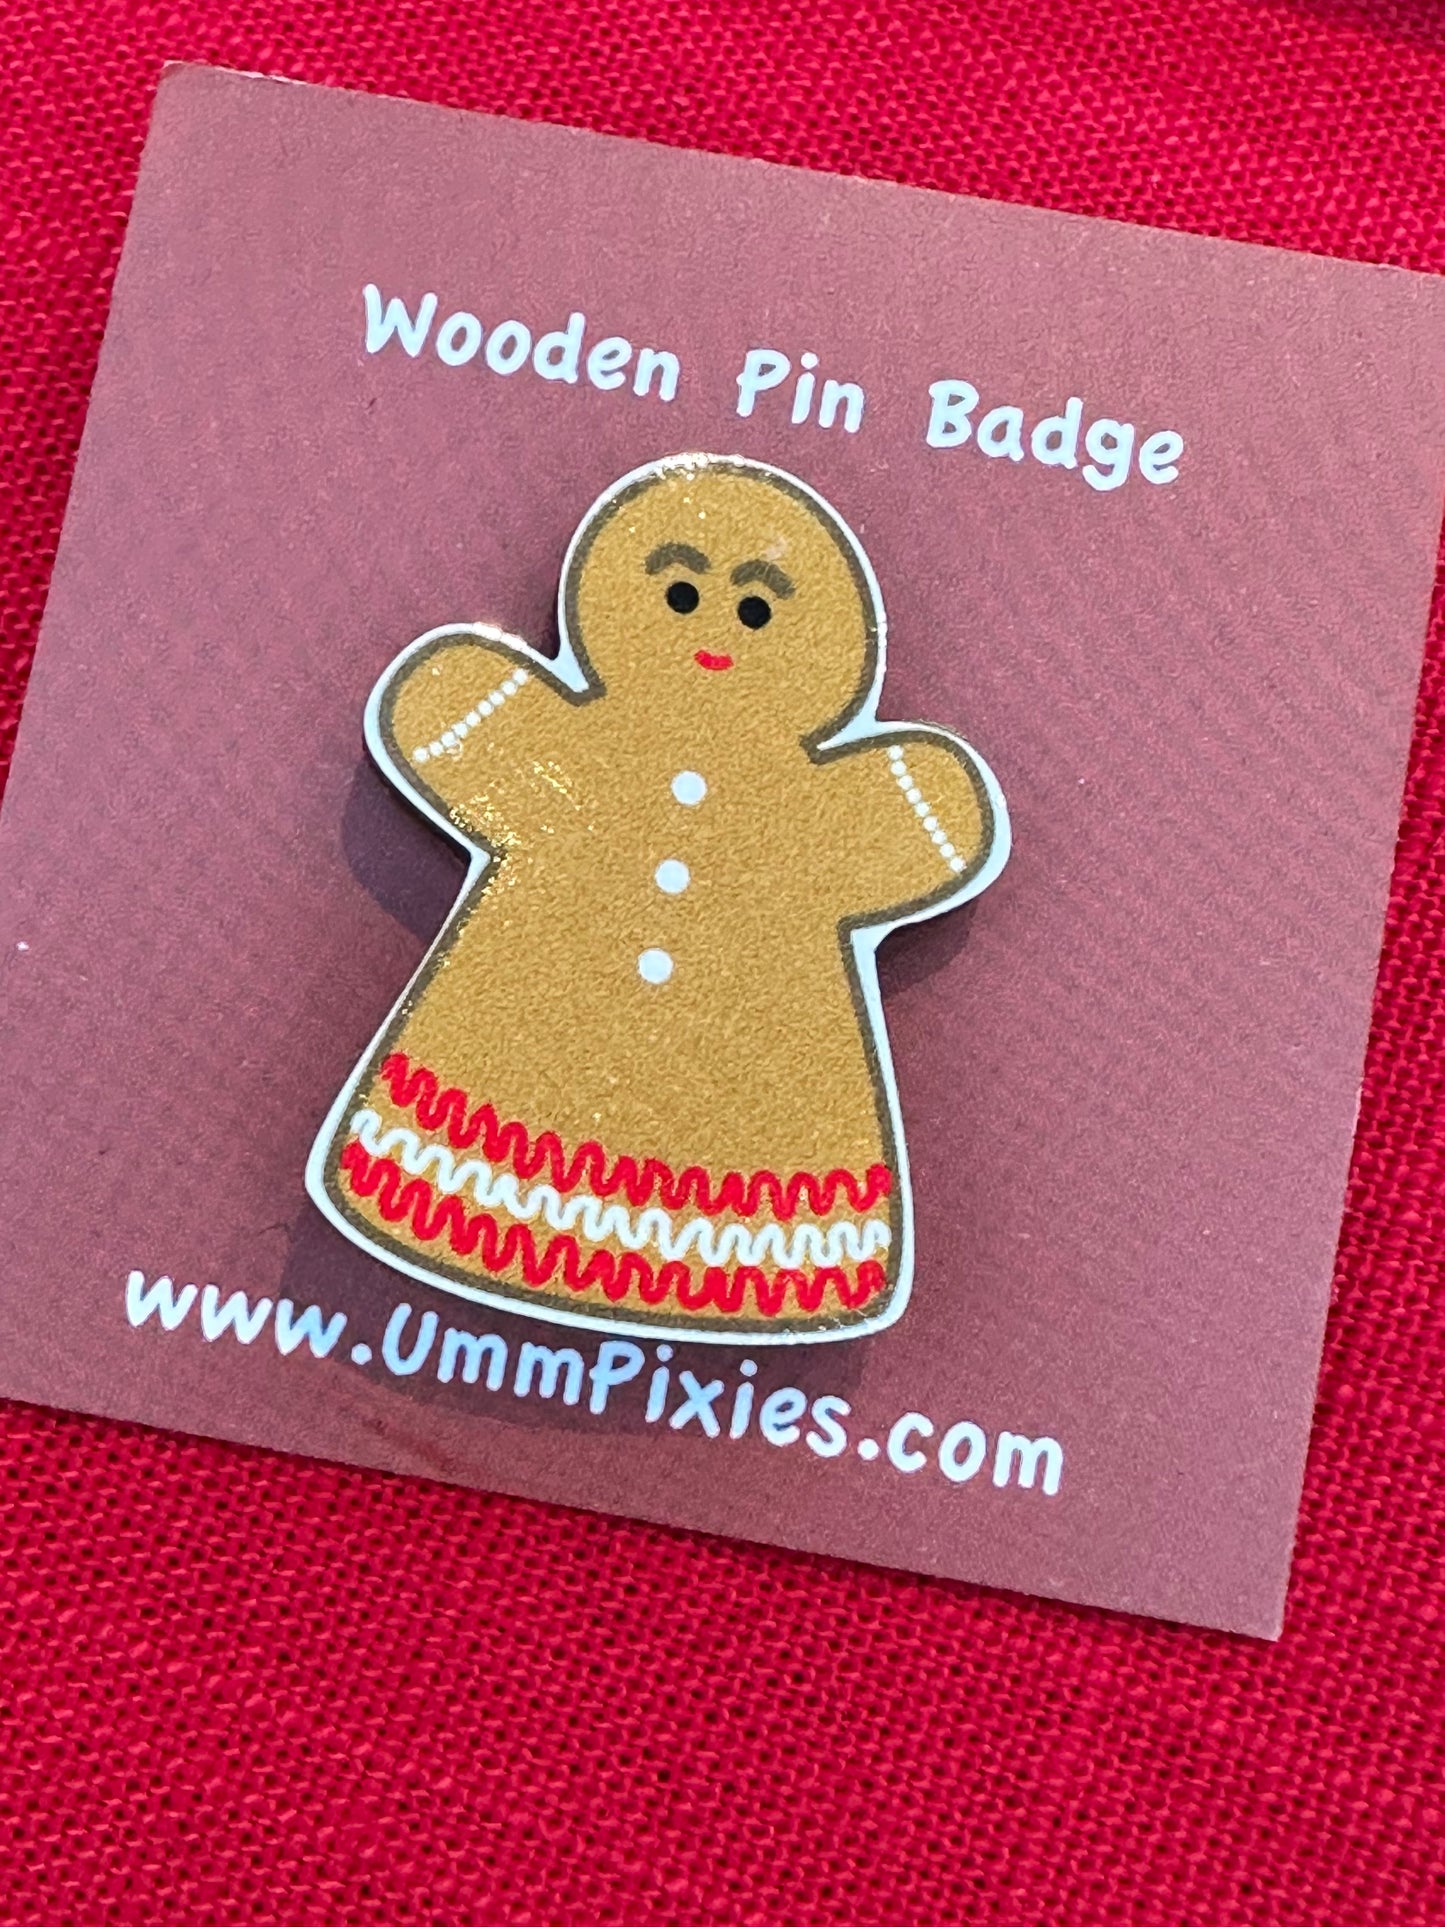 Wooden Gingerbread pin badge shown on backing card